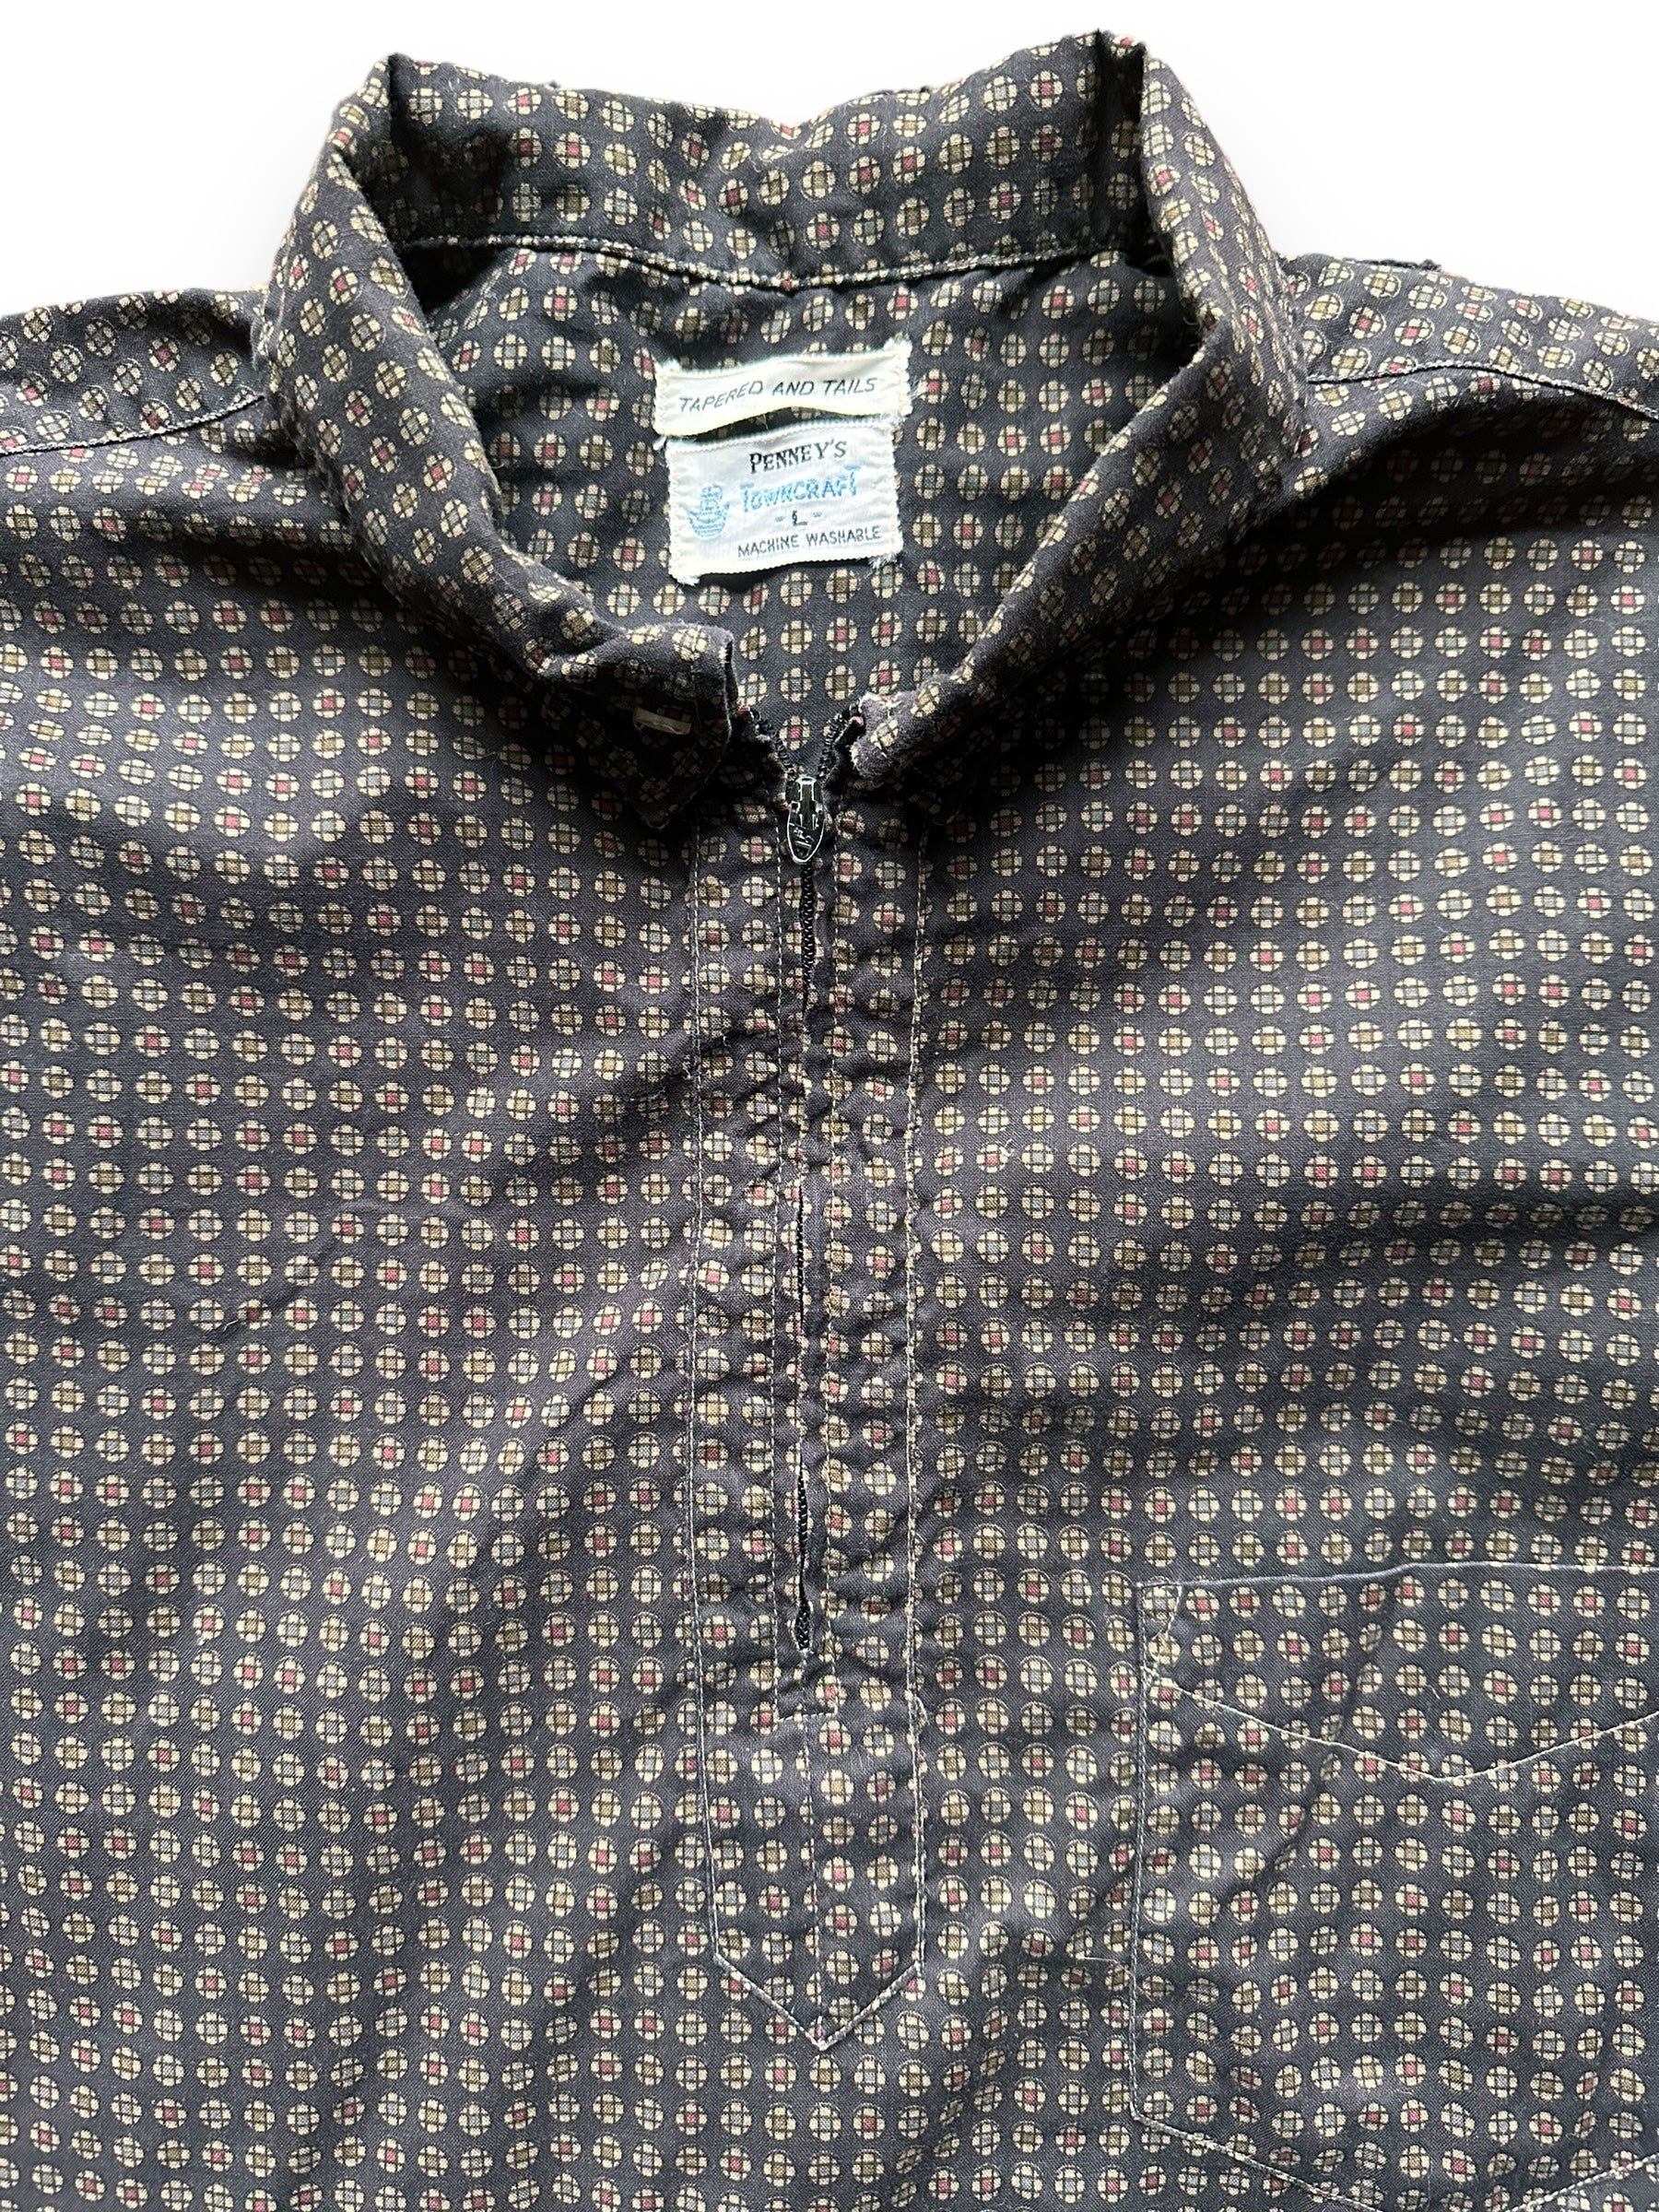 Collar and Tag View of Vintage Penney's Towncraft 1/4 Zip Long Sleeve Shirt SZ L| Vintage Rockabilly Shirt Seattle | Barn Owl Vintage Clothing Seattle